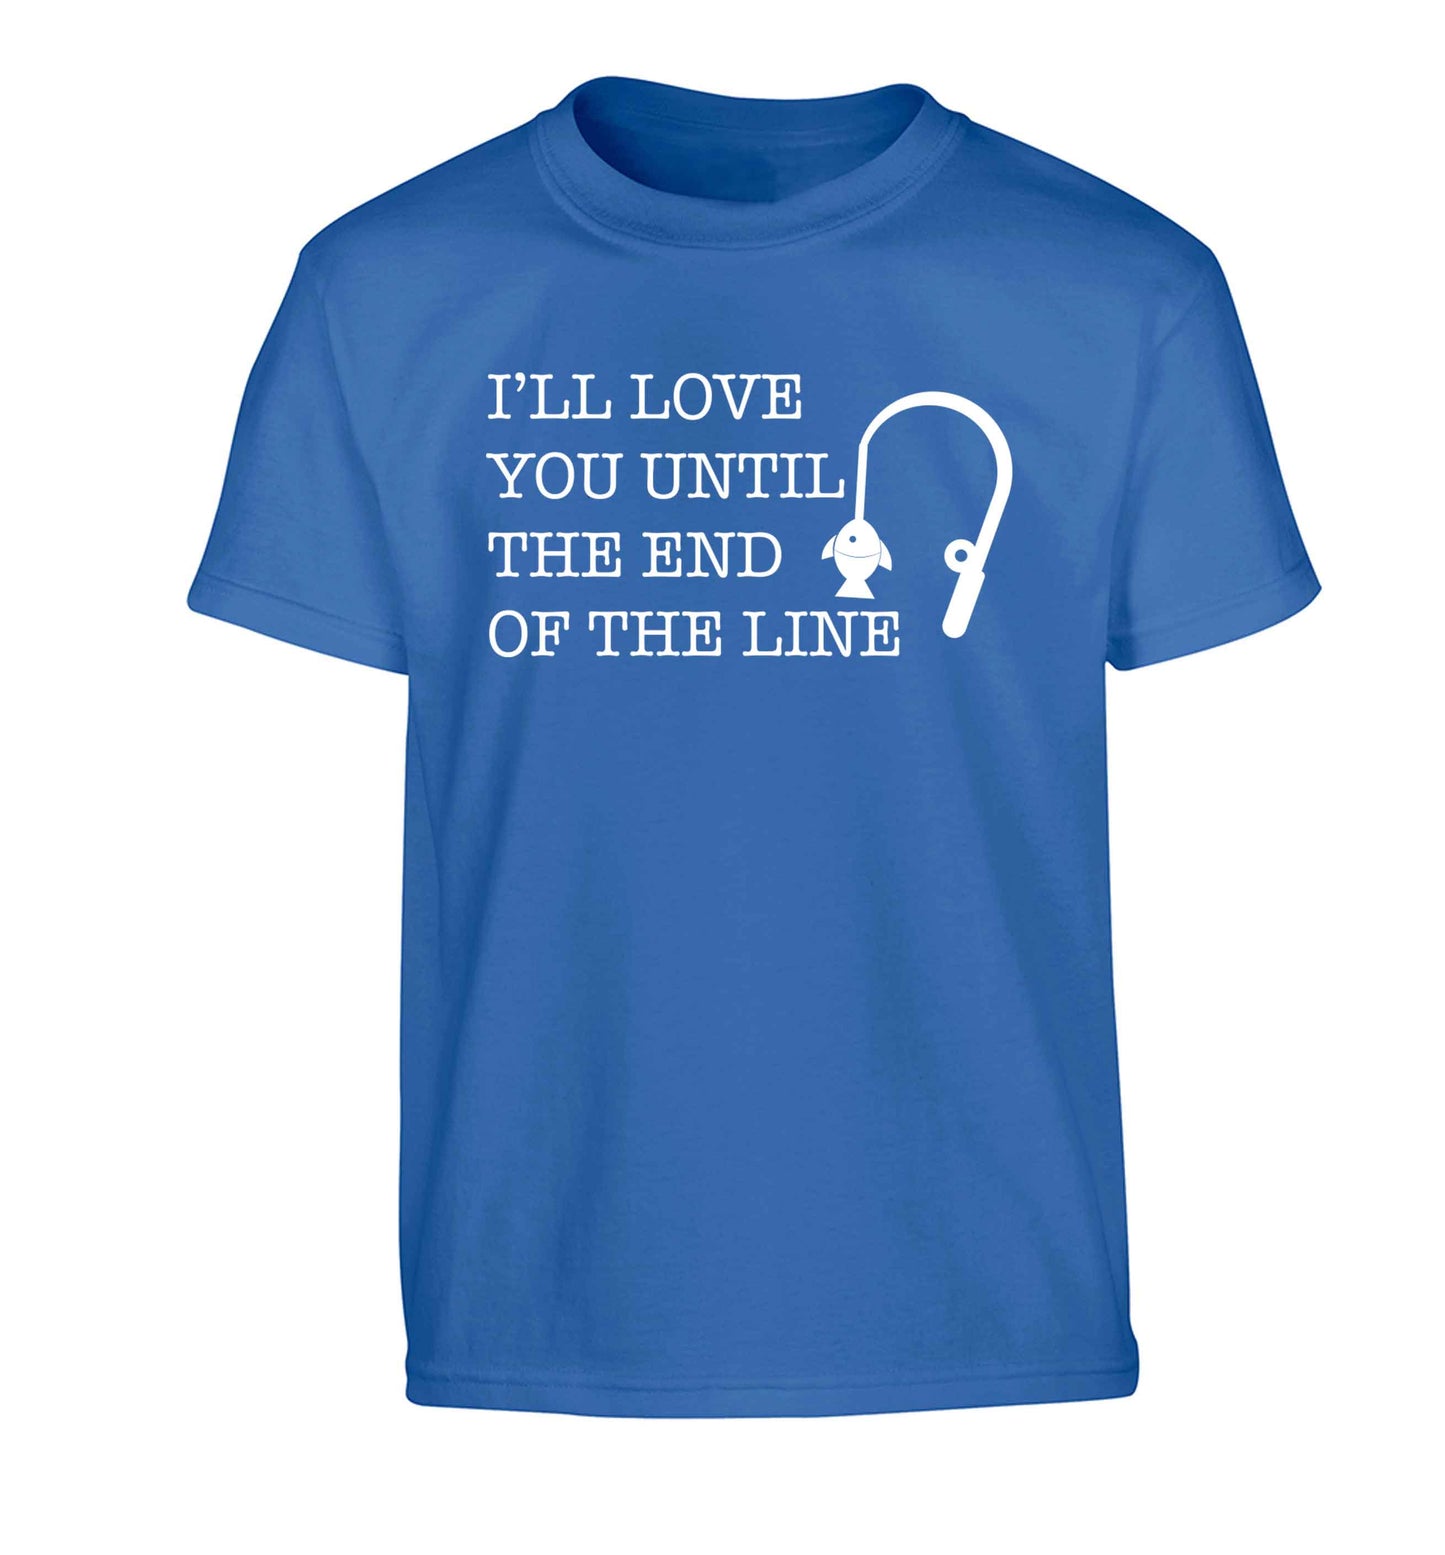 I'll love you until the end of the line Children's blue Tshirt 12-13 Years